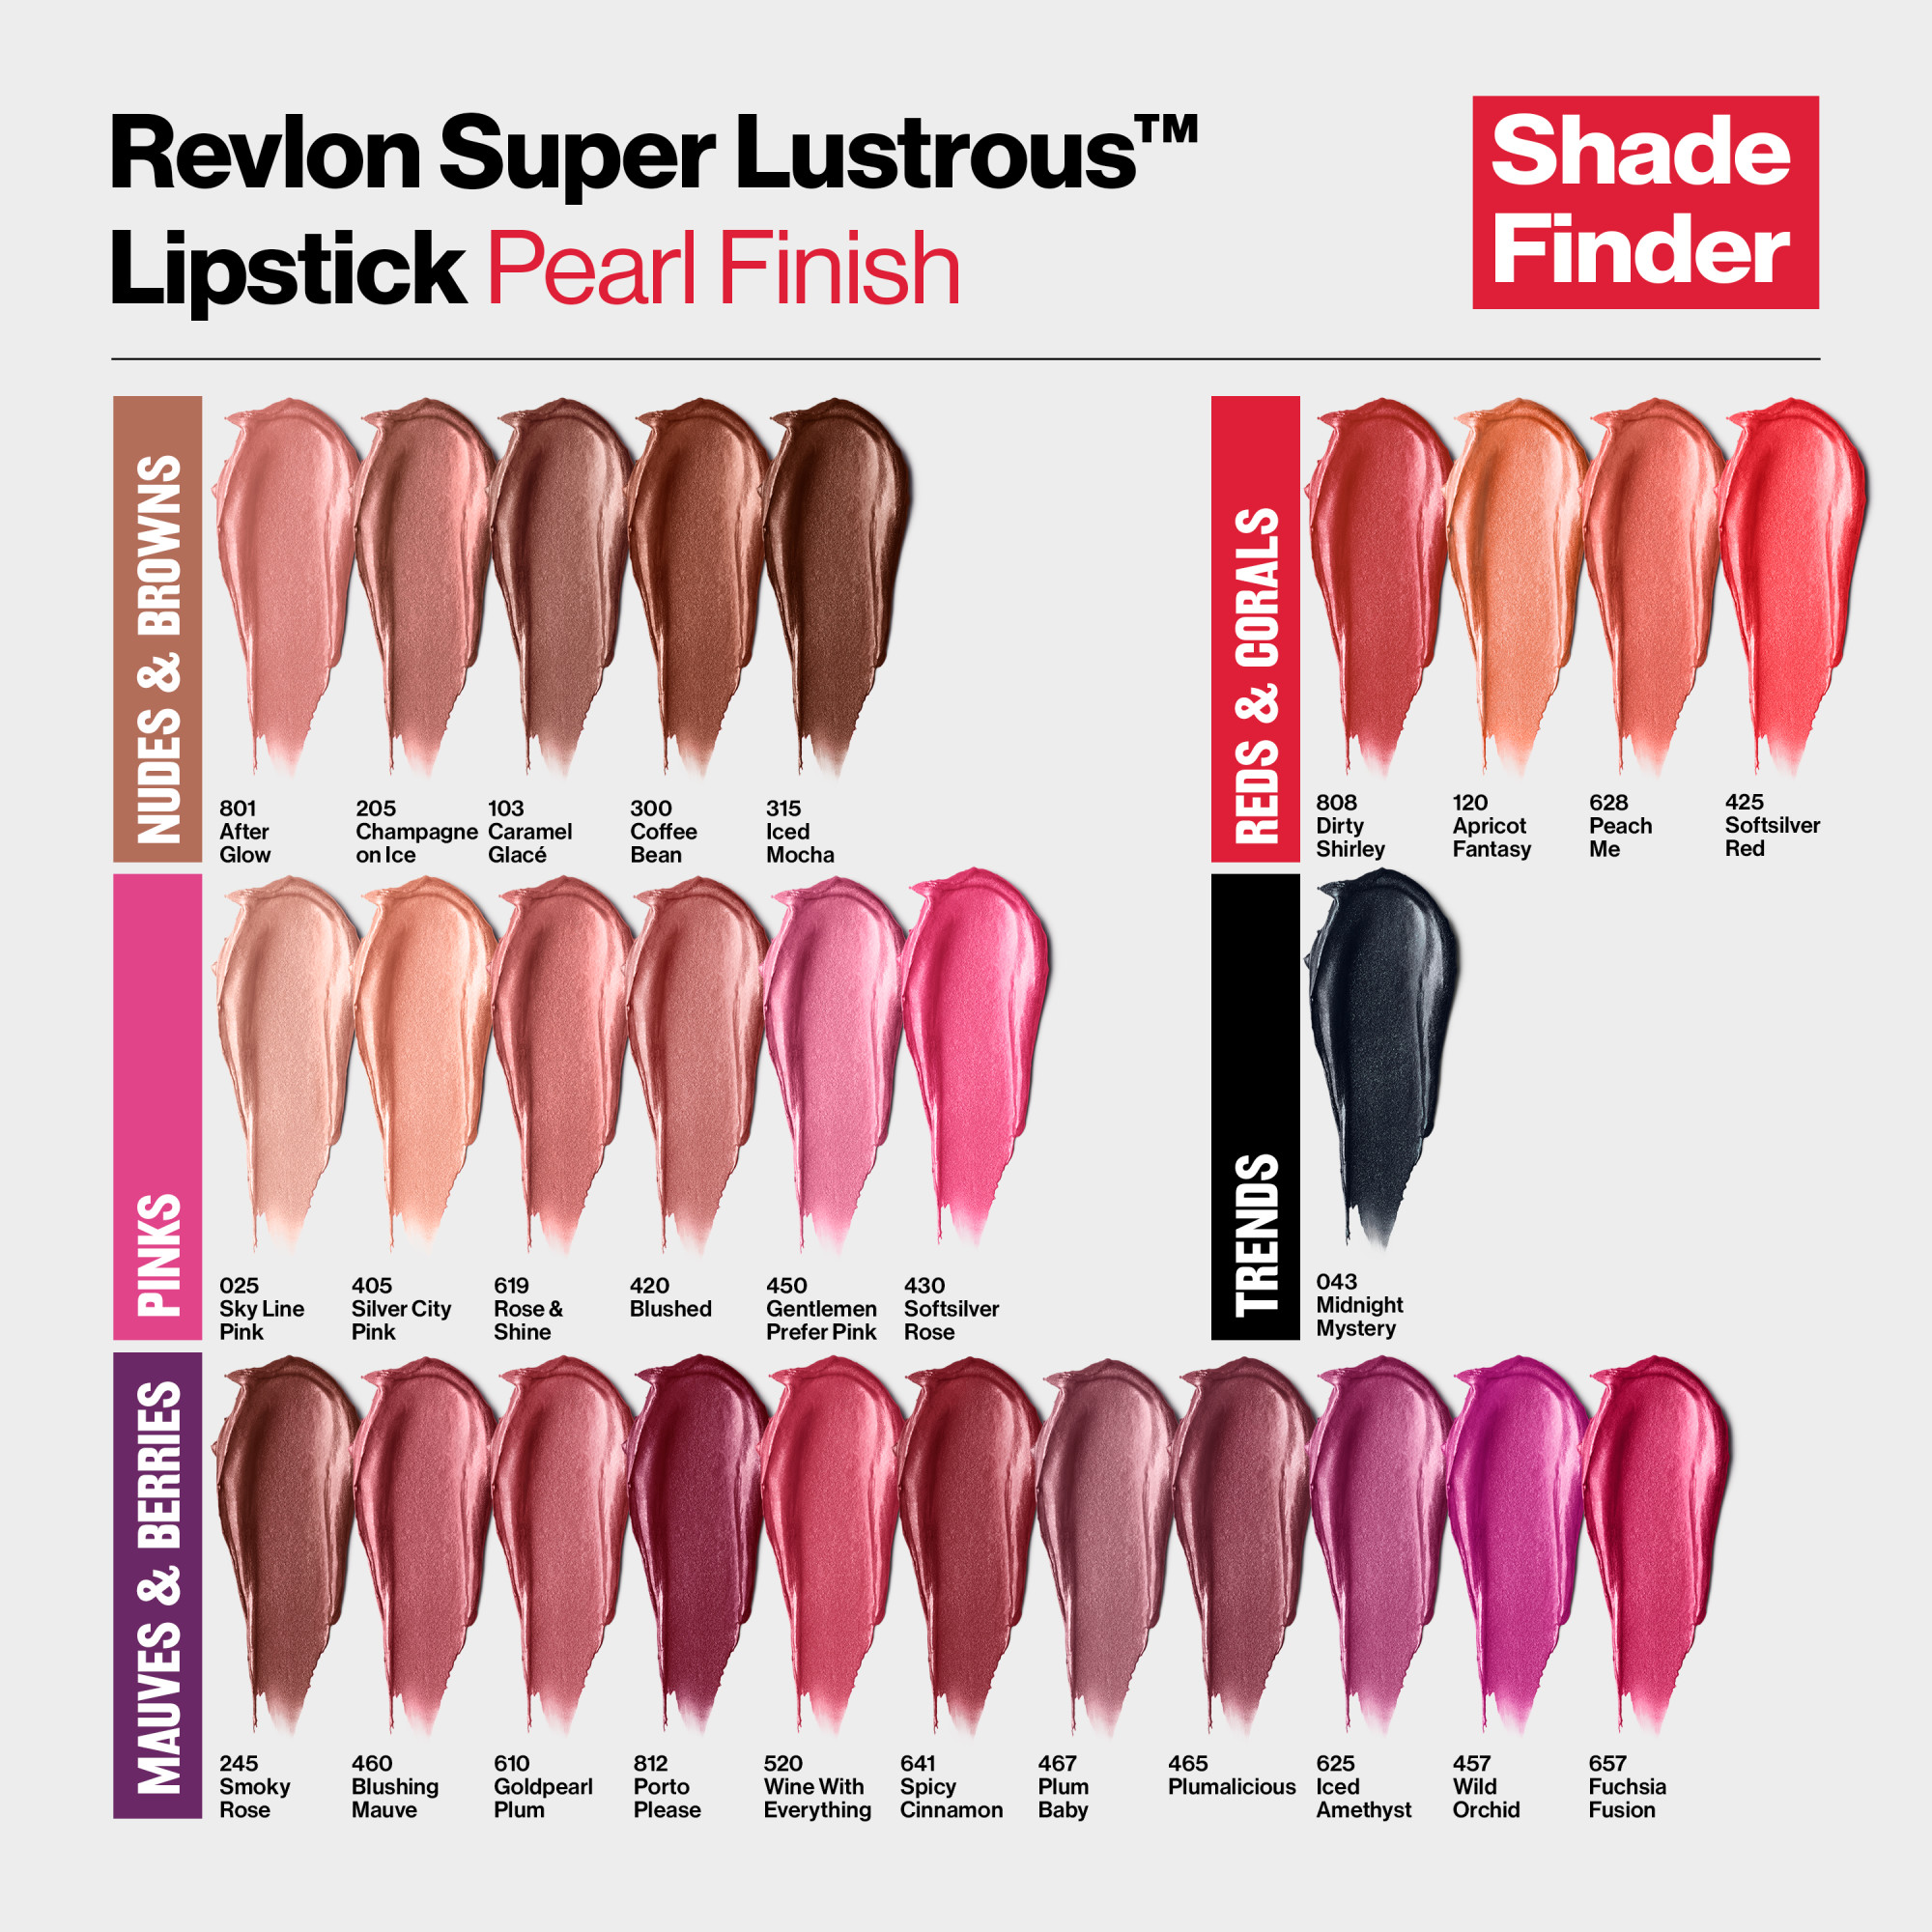 Revlon Super Lustrous Pearl Lipstick, Creamy Formula, 520 Wine With Everything, 0.15 oz - image 5 of 10